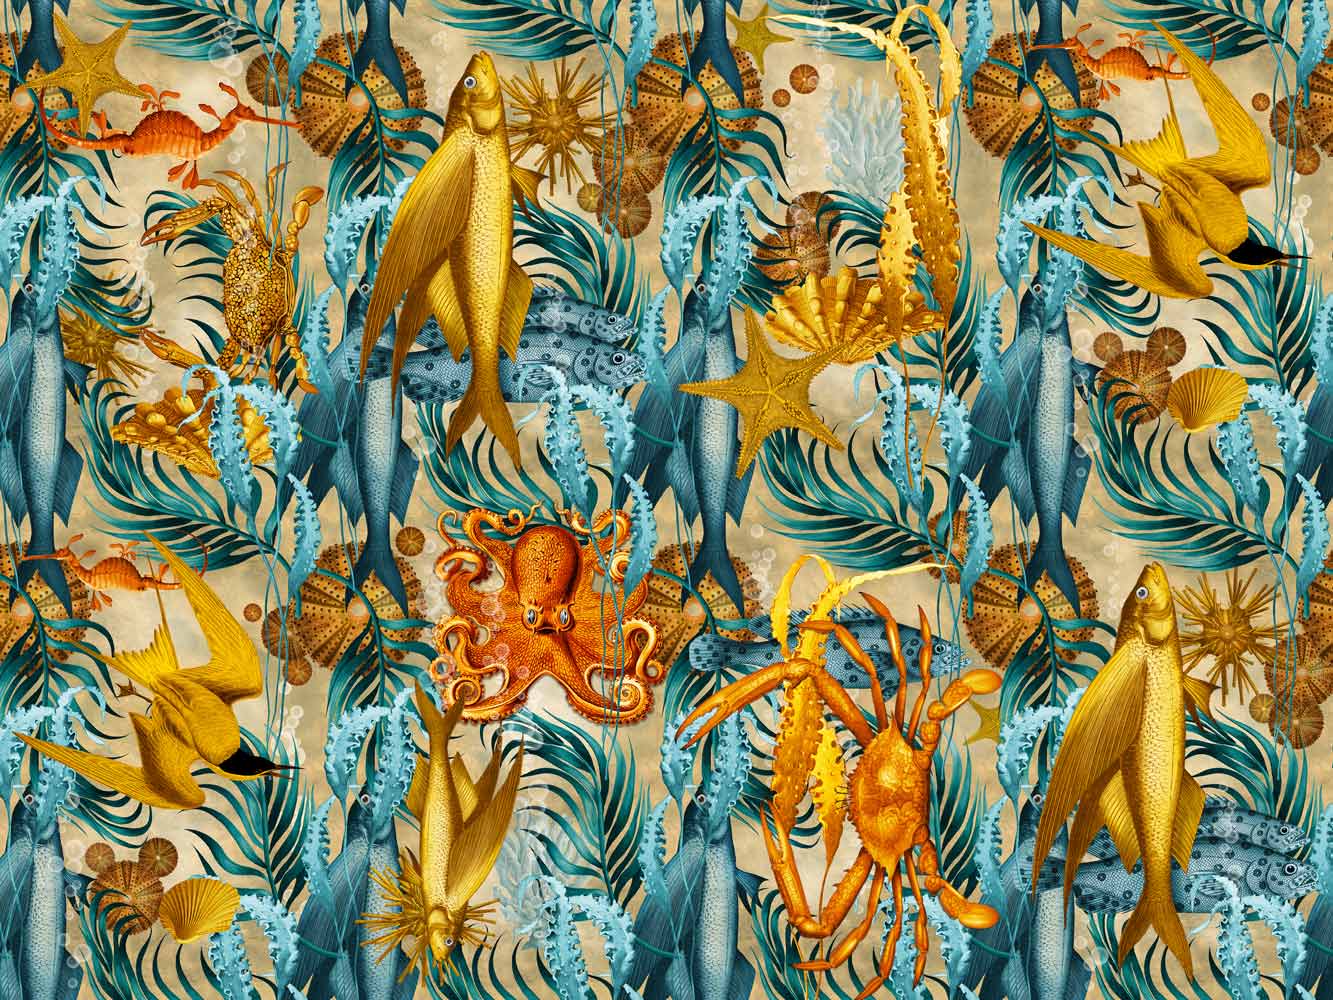 Ionian design repeat in fabric weave base and aquatic animals